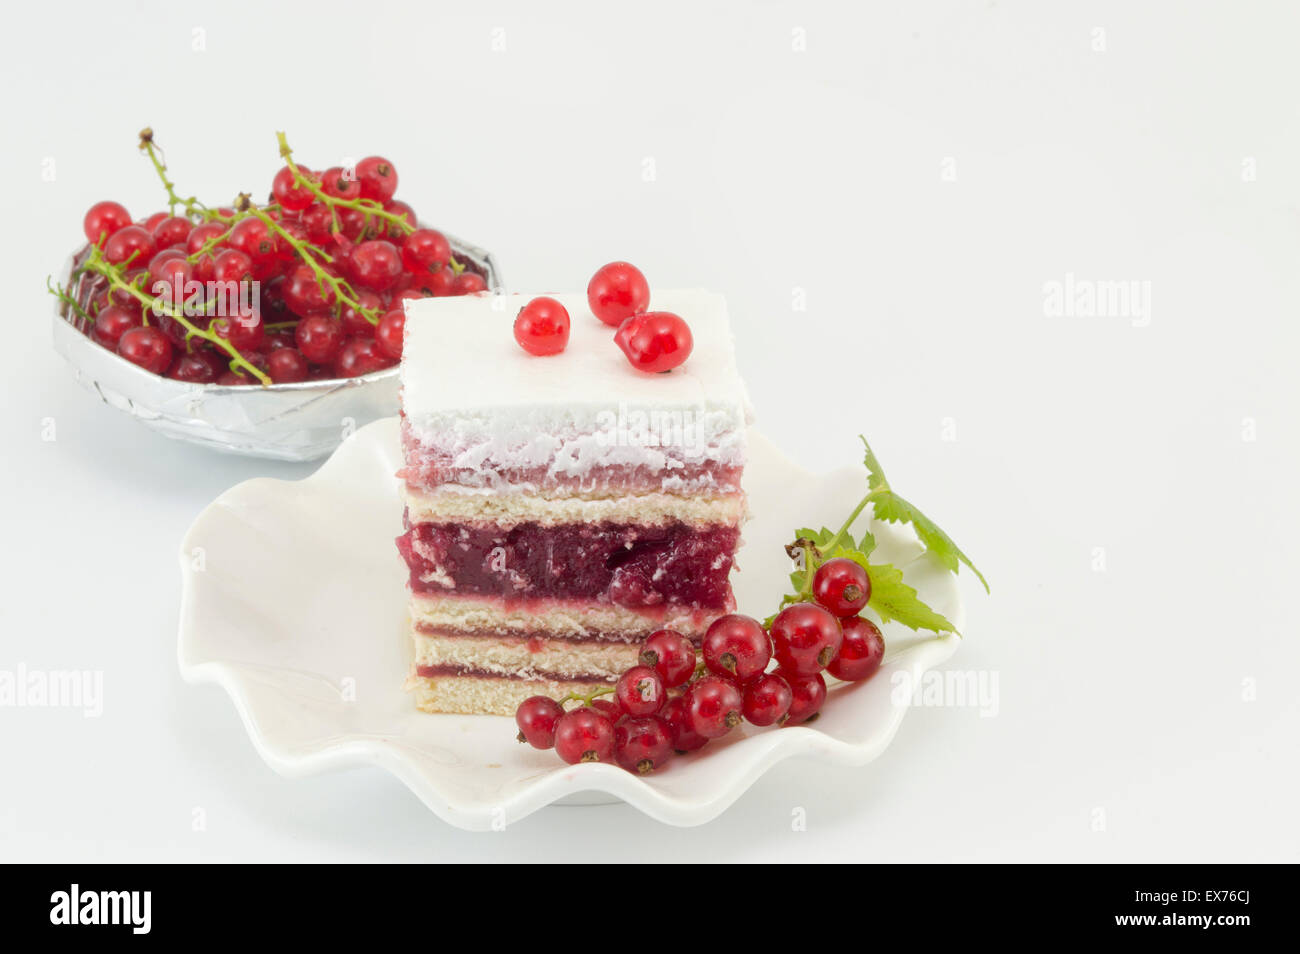 Homemade fruit cake with currant and fresh currant fruit on white background Stock Photo